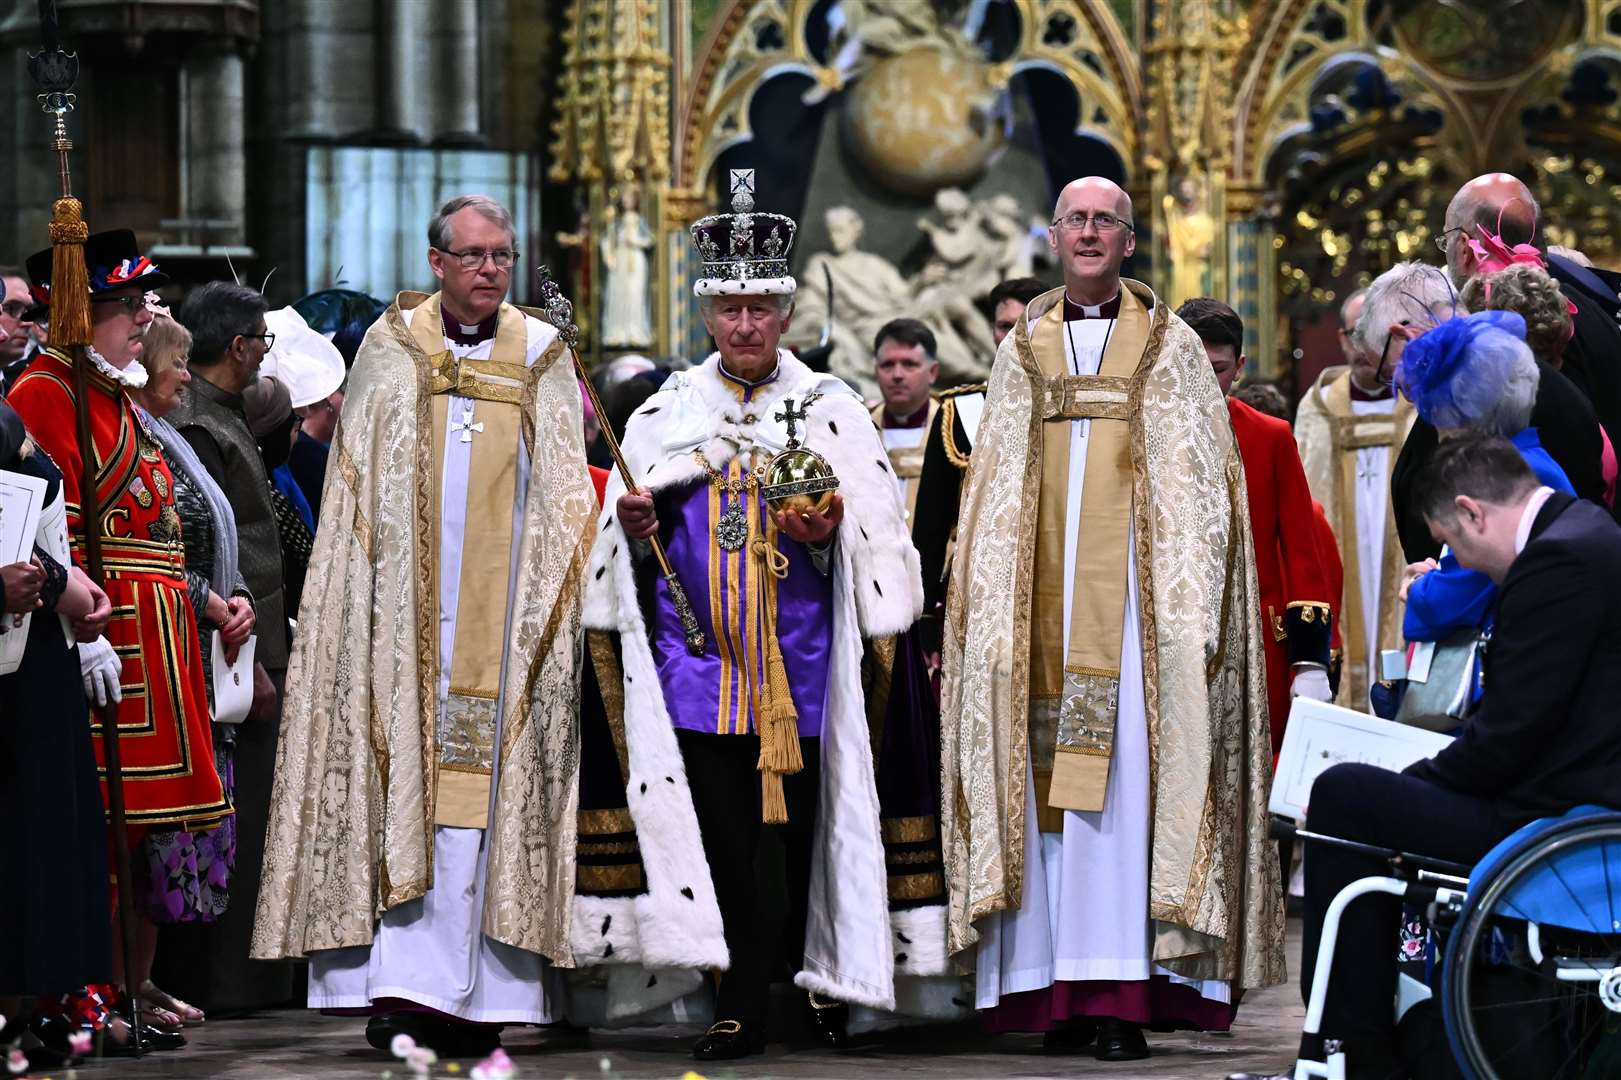 The King carrying the Sovereign’s Orb and Sceptre leaves Westminster Abbey (Ben Stanstall/PA)